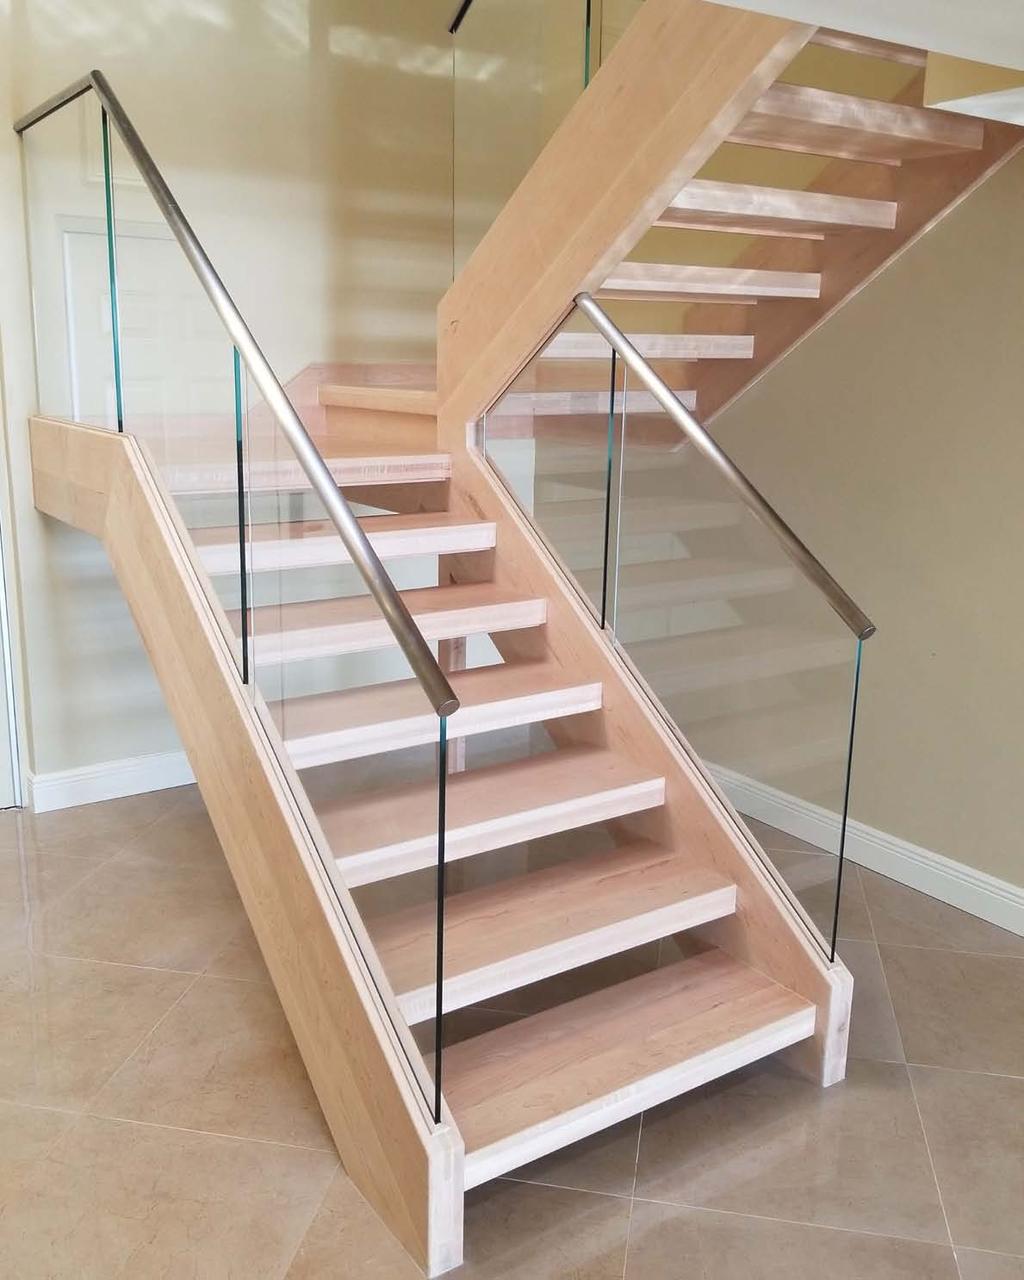 Aesthetic value: The remodel of this stair was vital to opening up this space.